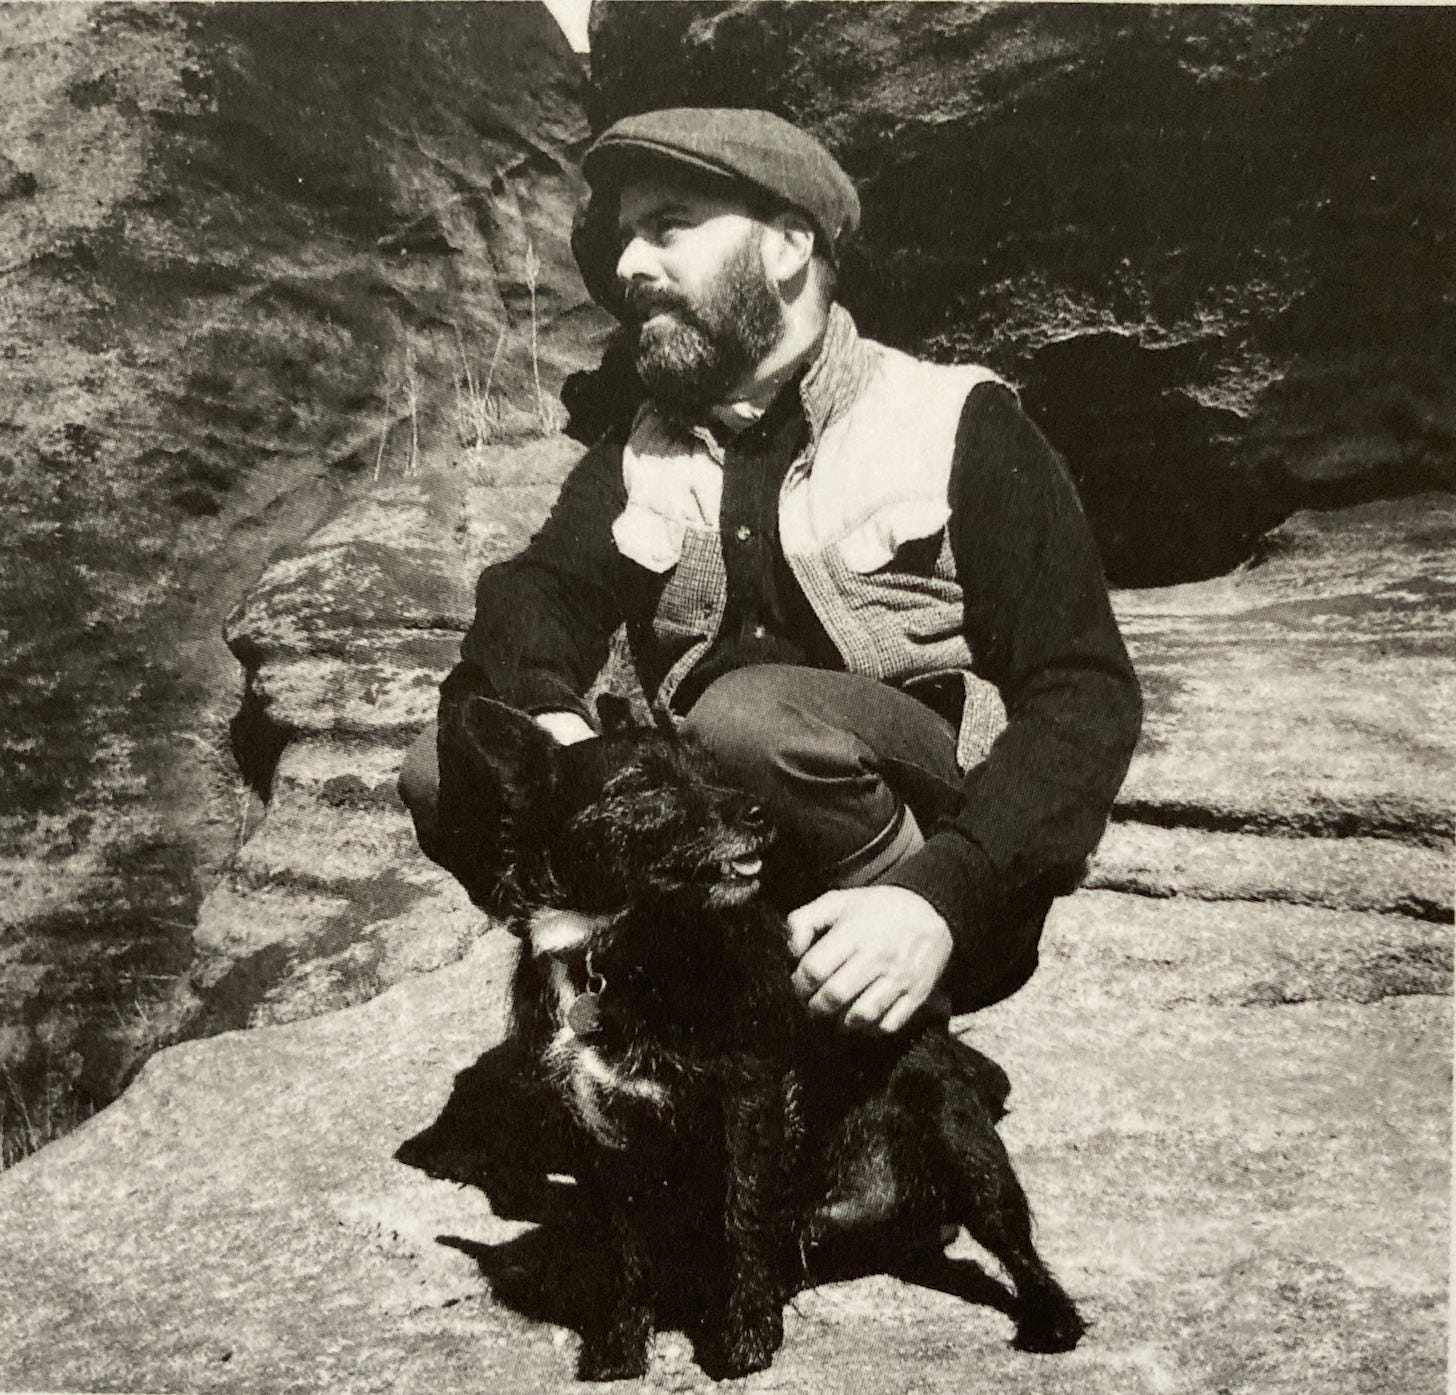 Author Benjamin Myers with his dog beneath Scout Rock from the book jacket of Under the Rock